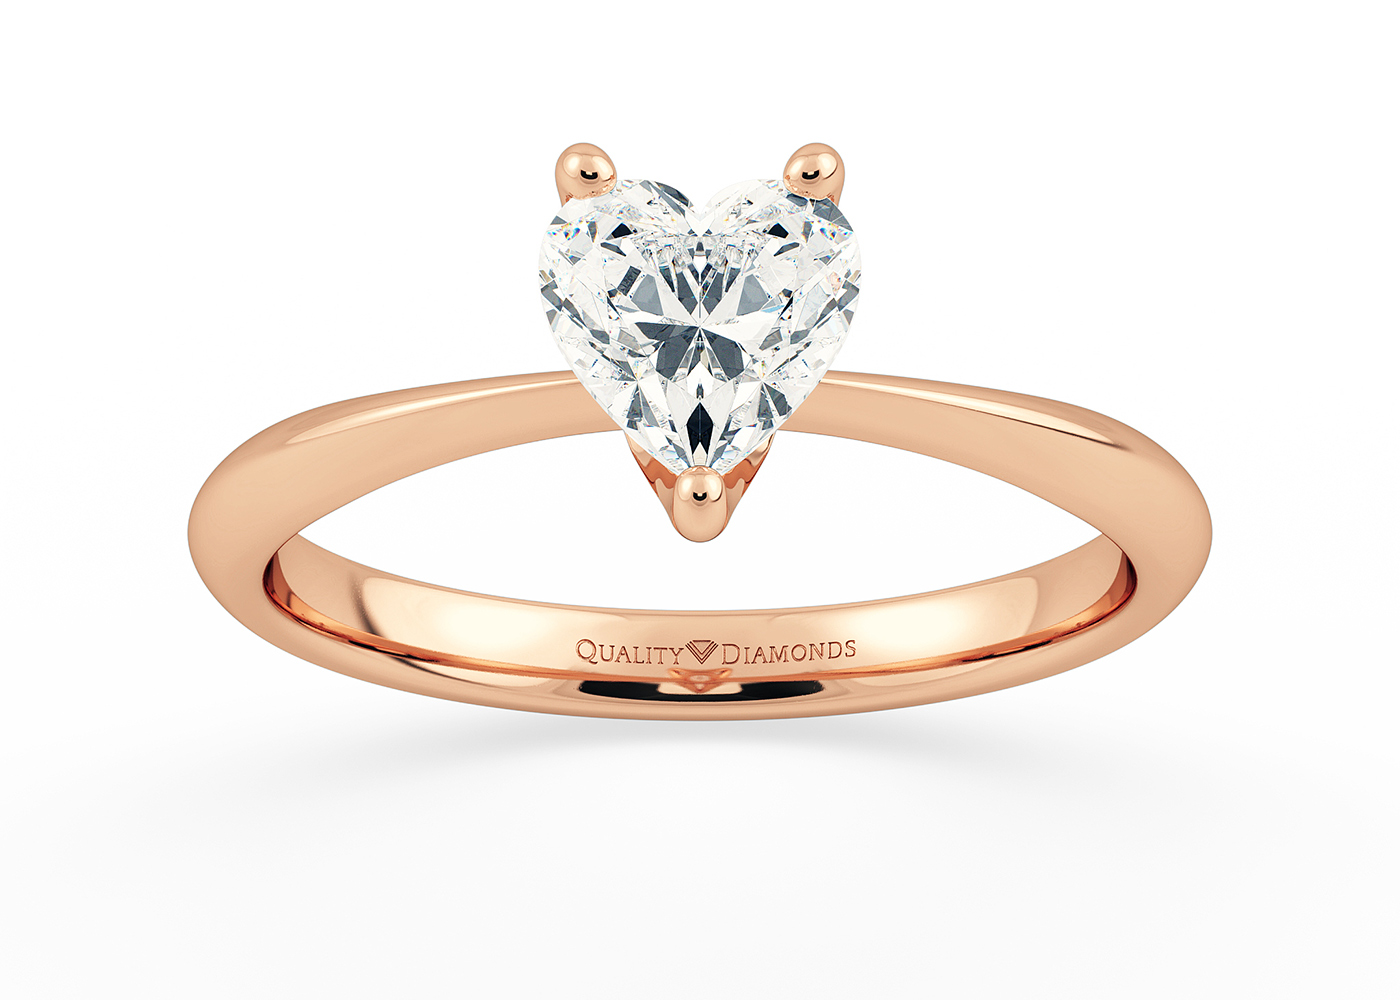 One Carat Heart Solitaire Diamond Engagement Ring in 18K Rose Gold